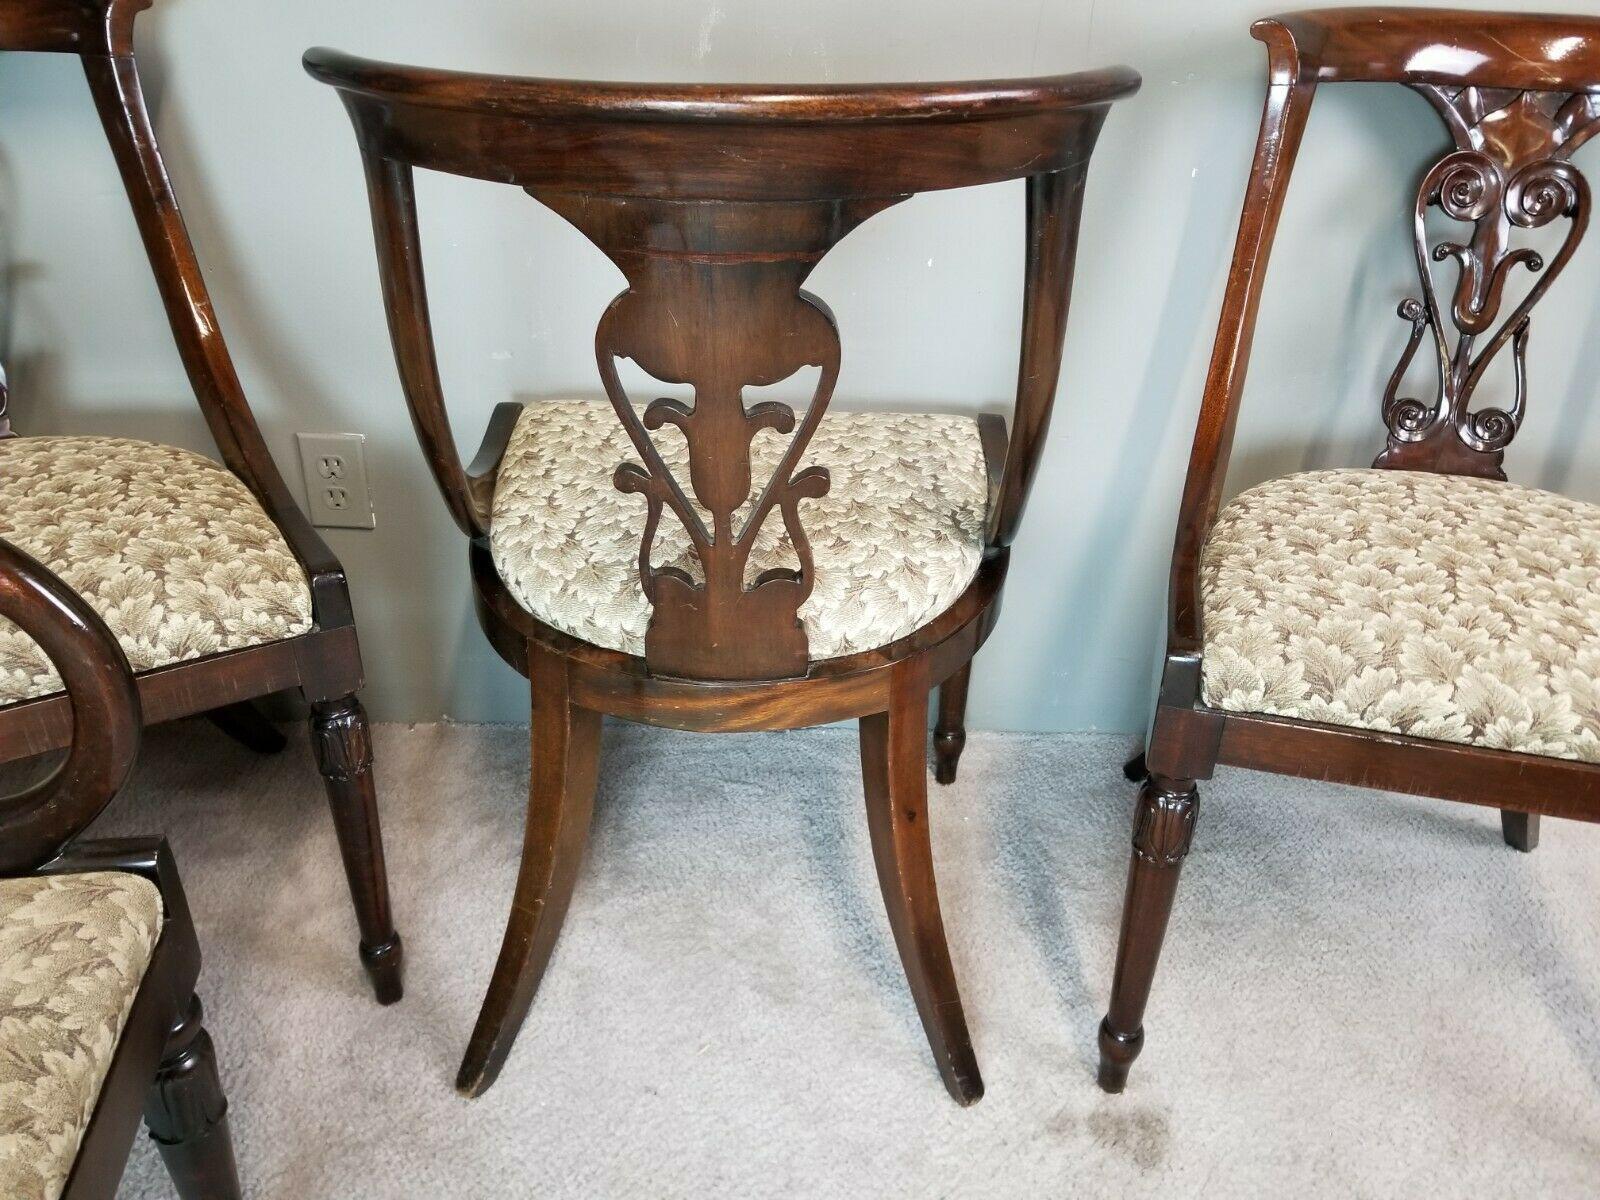 Antique English Regency Solid Mahogany Scroll Arm Dining Chairs, Set of 5 For Sale 1